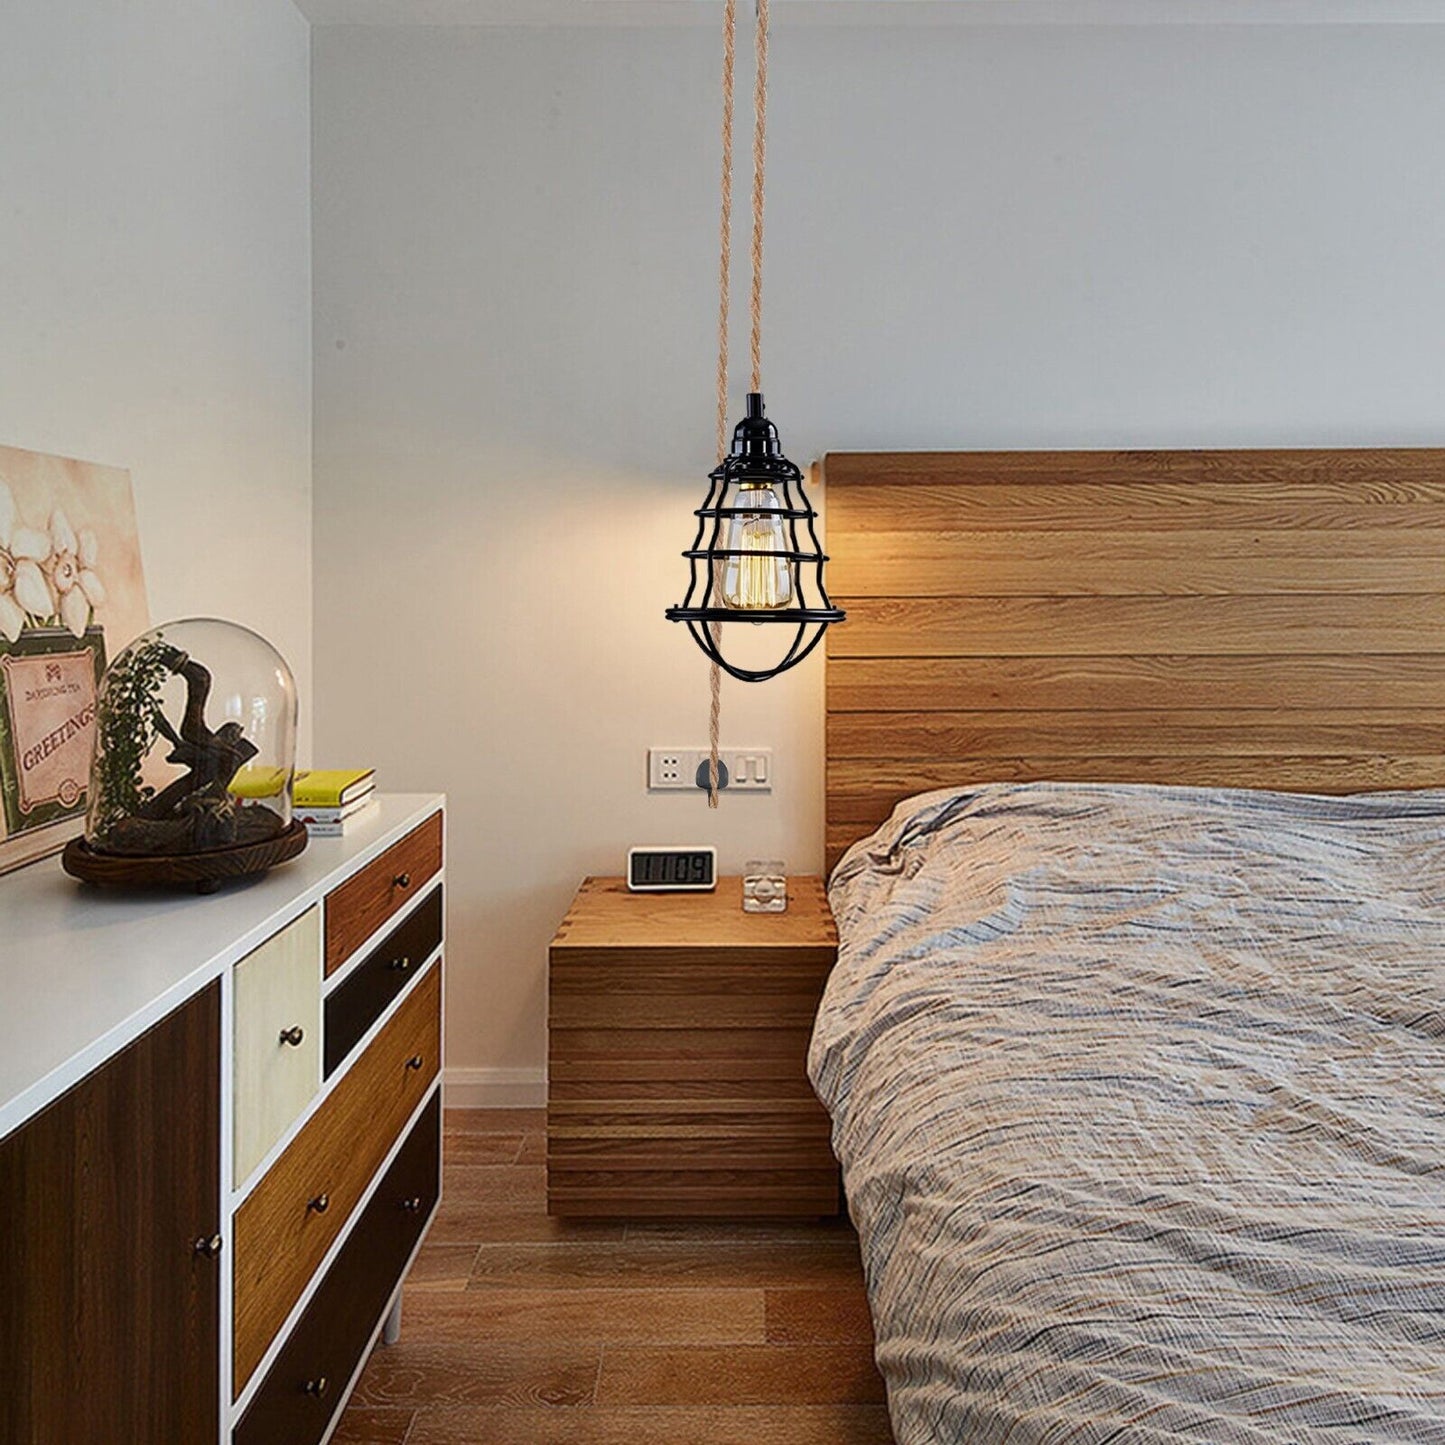 Rope Pendant Light - Plug in Pendant Light with Dimmer Switch for bed room.JPG